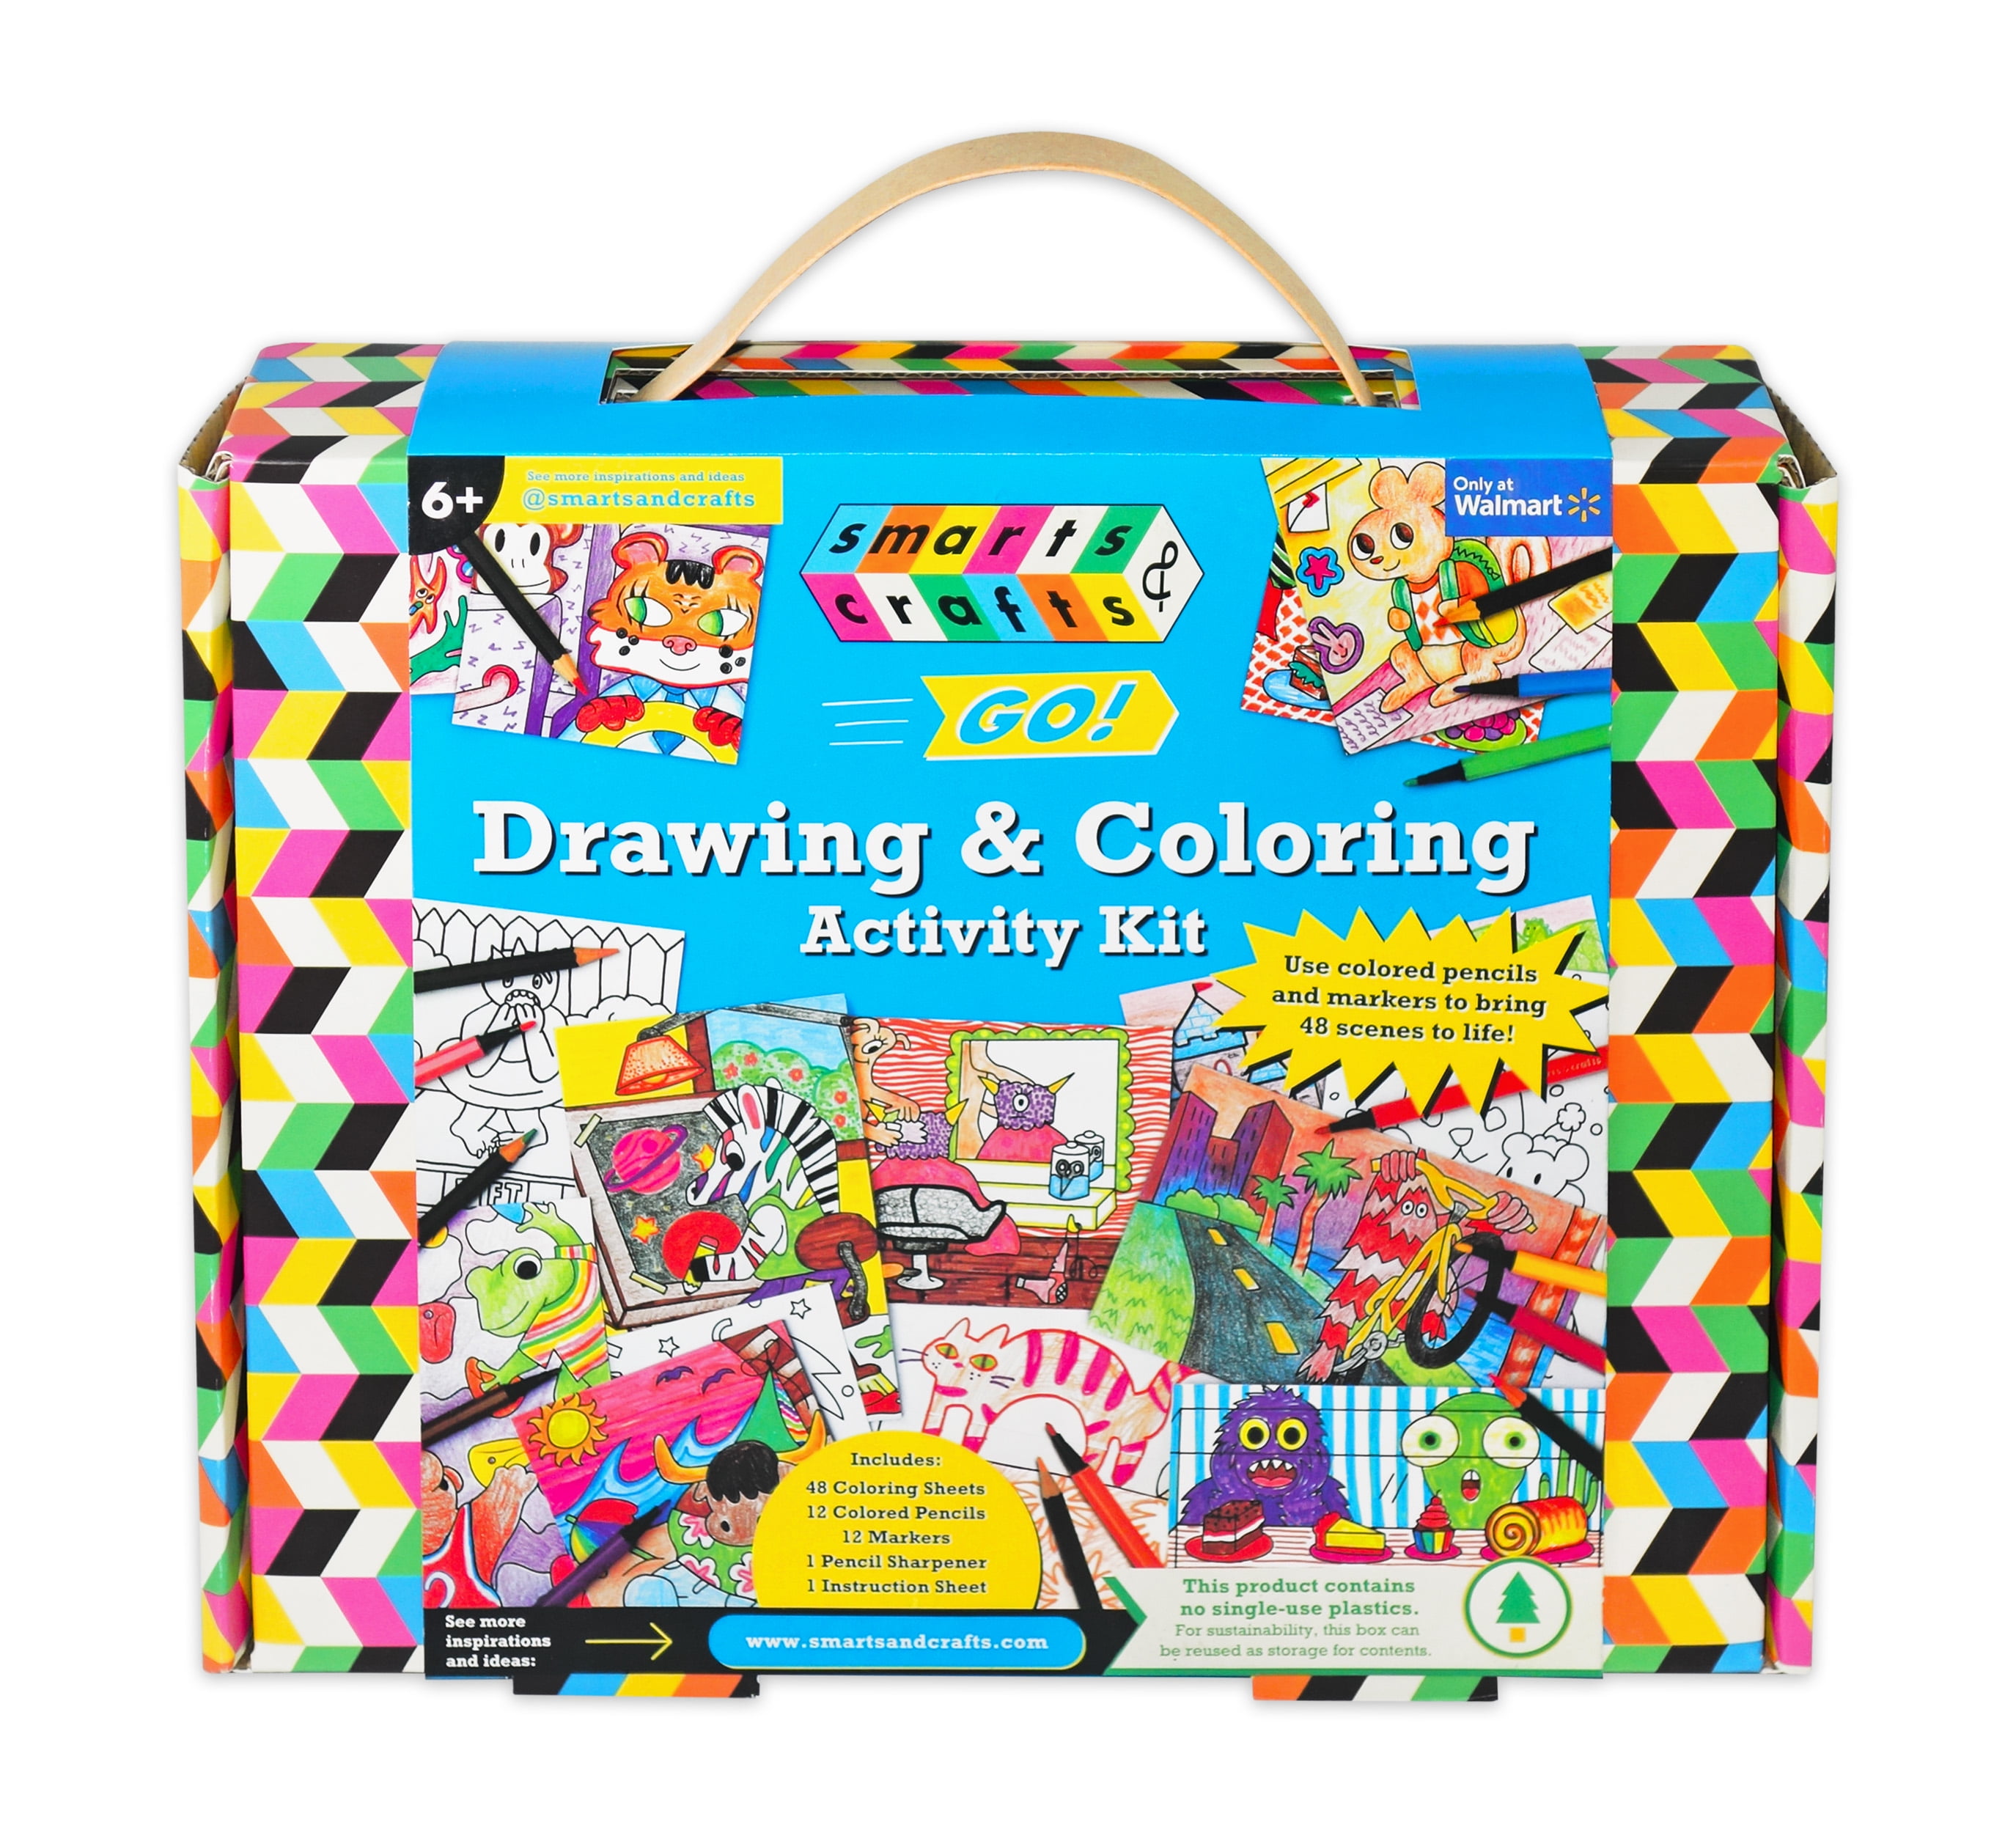 Smarts & Crafts Go: Coloring and Drawing Kit, 74 Pieces, for Boys, Girls  ages 6+ 